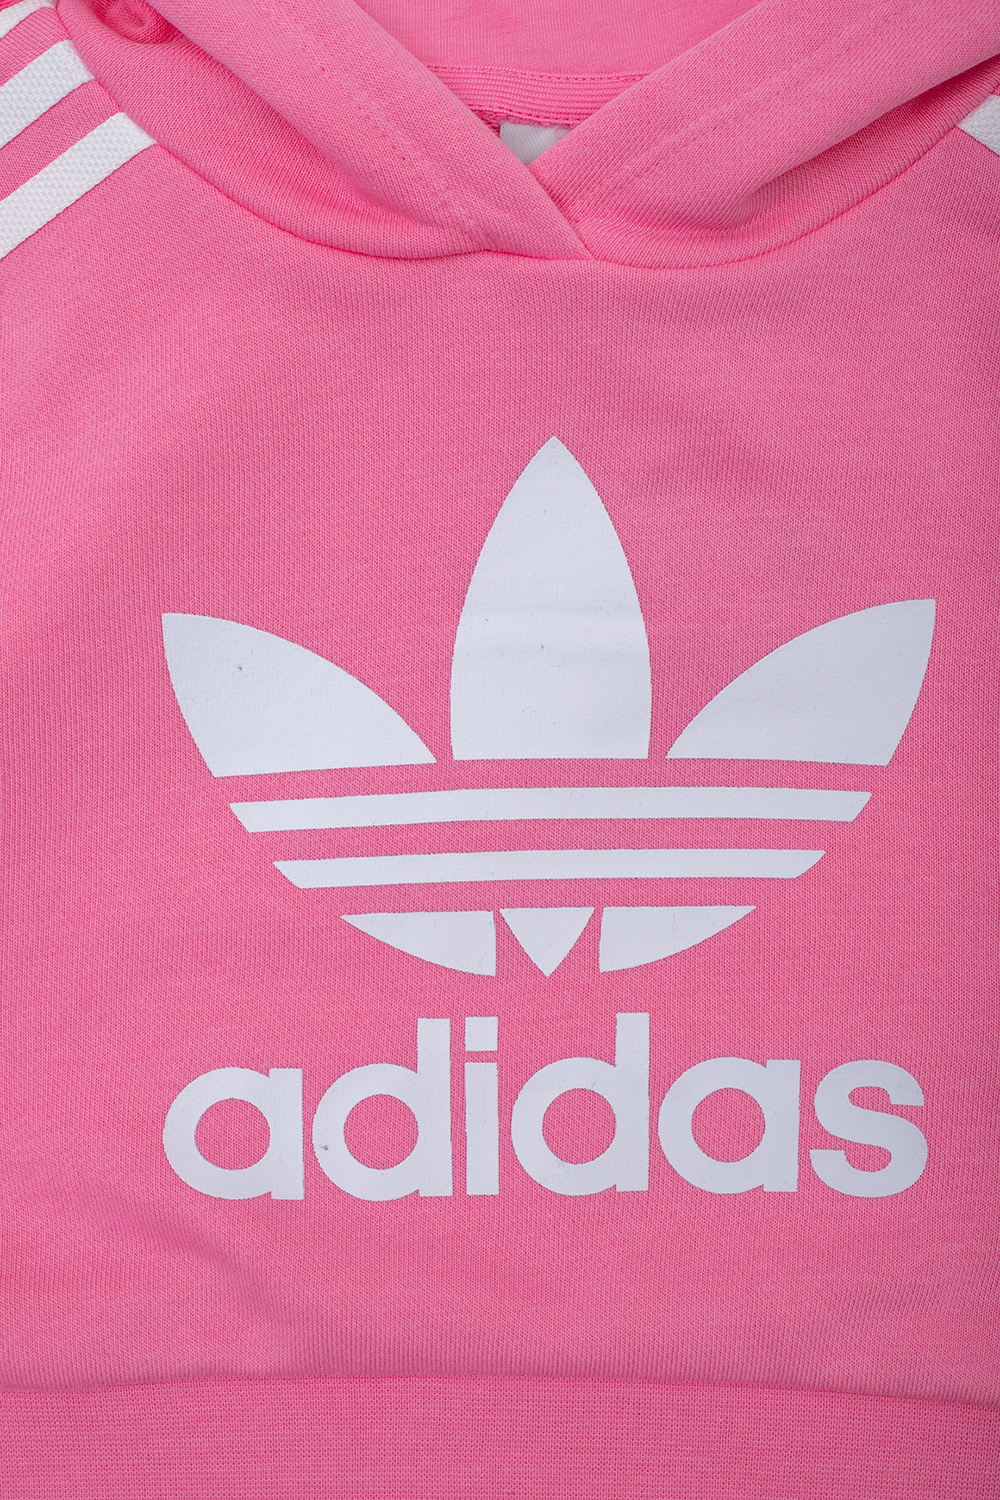 ADIDAS Kids store adidas yung 1 acid house in india price list